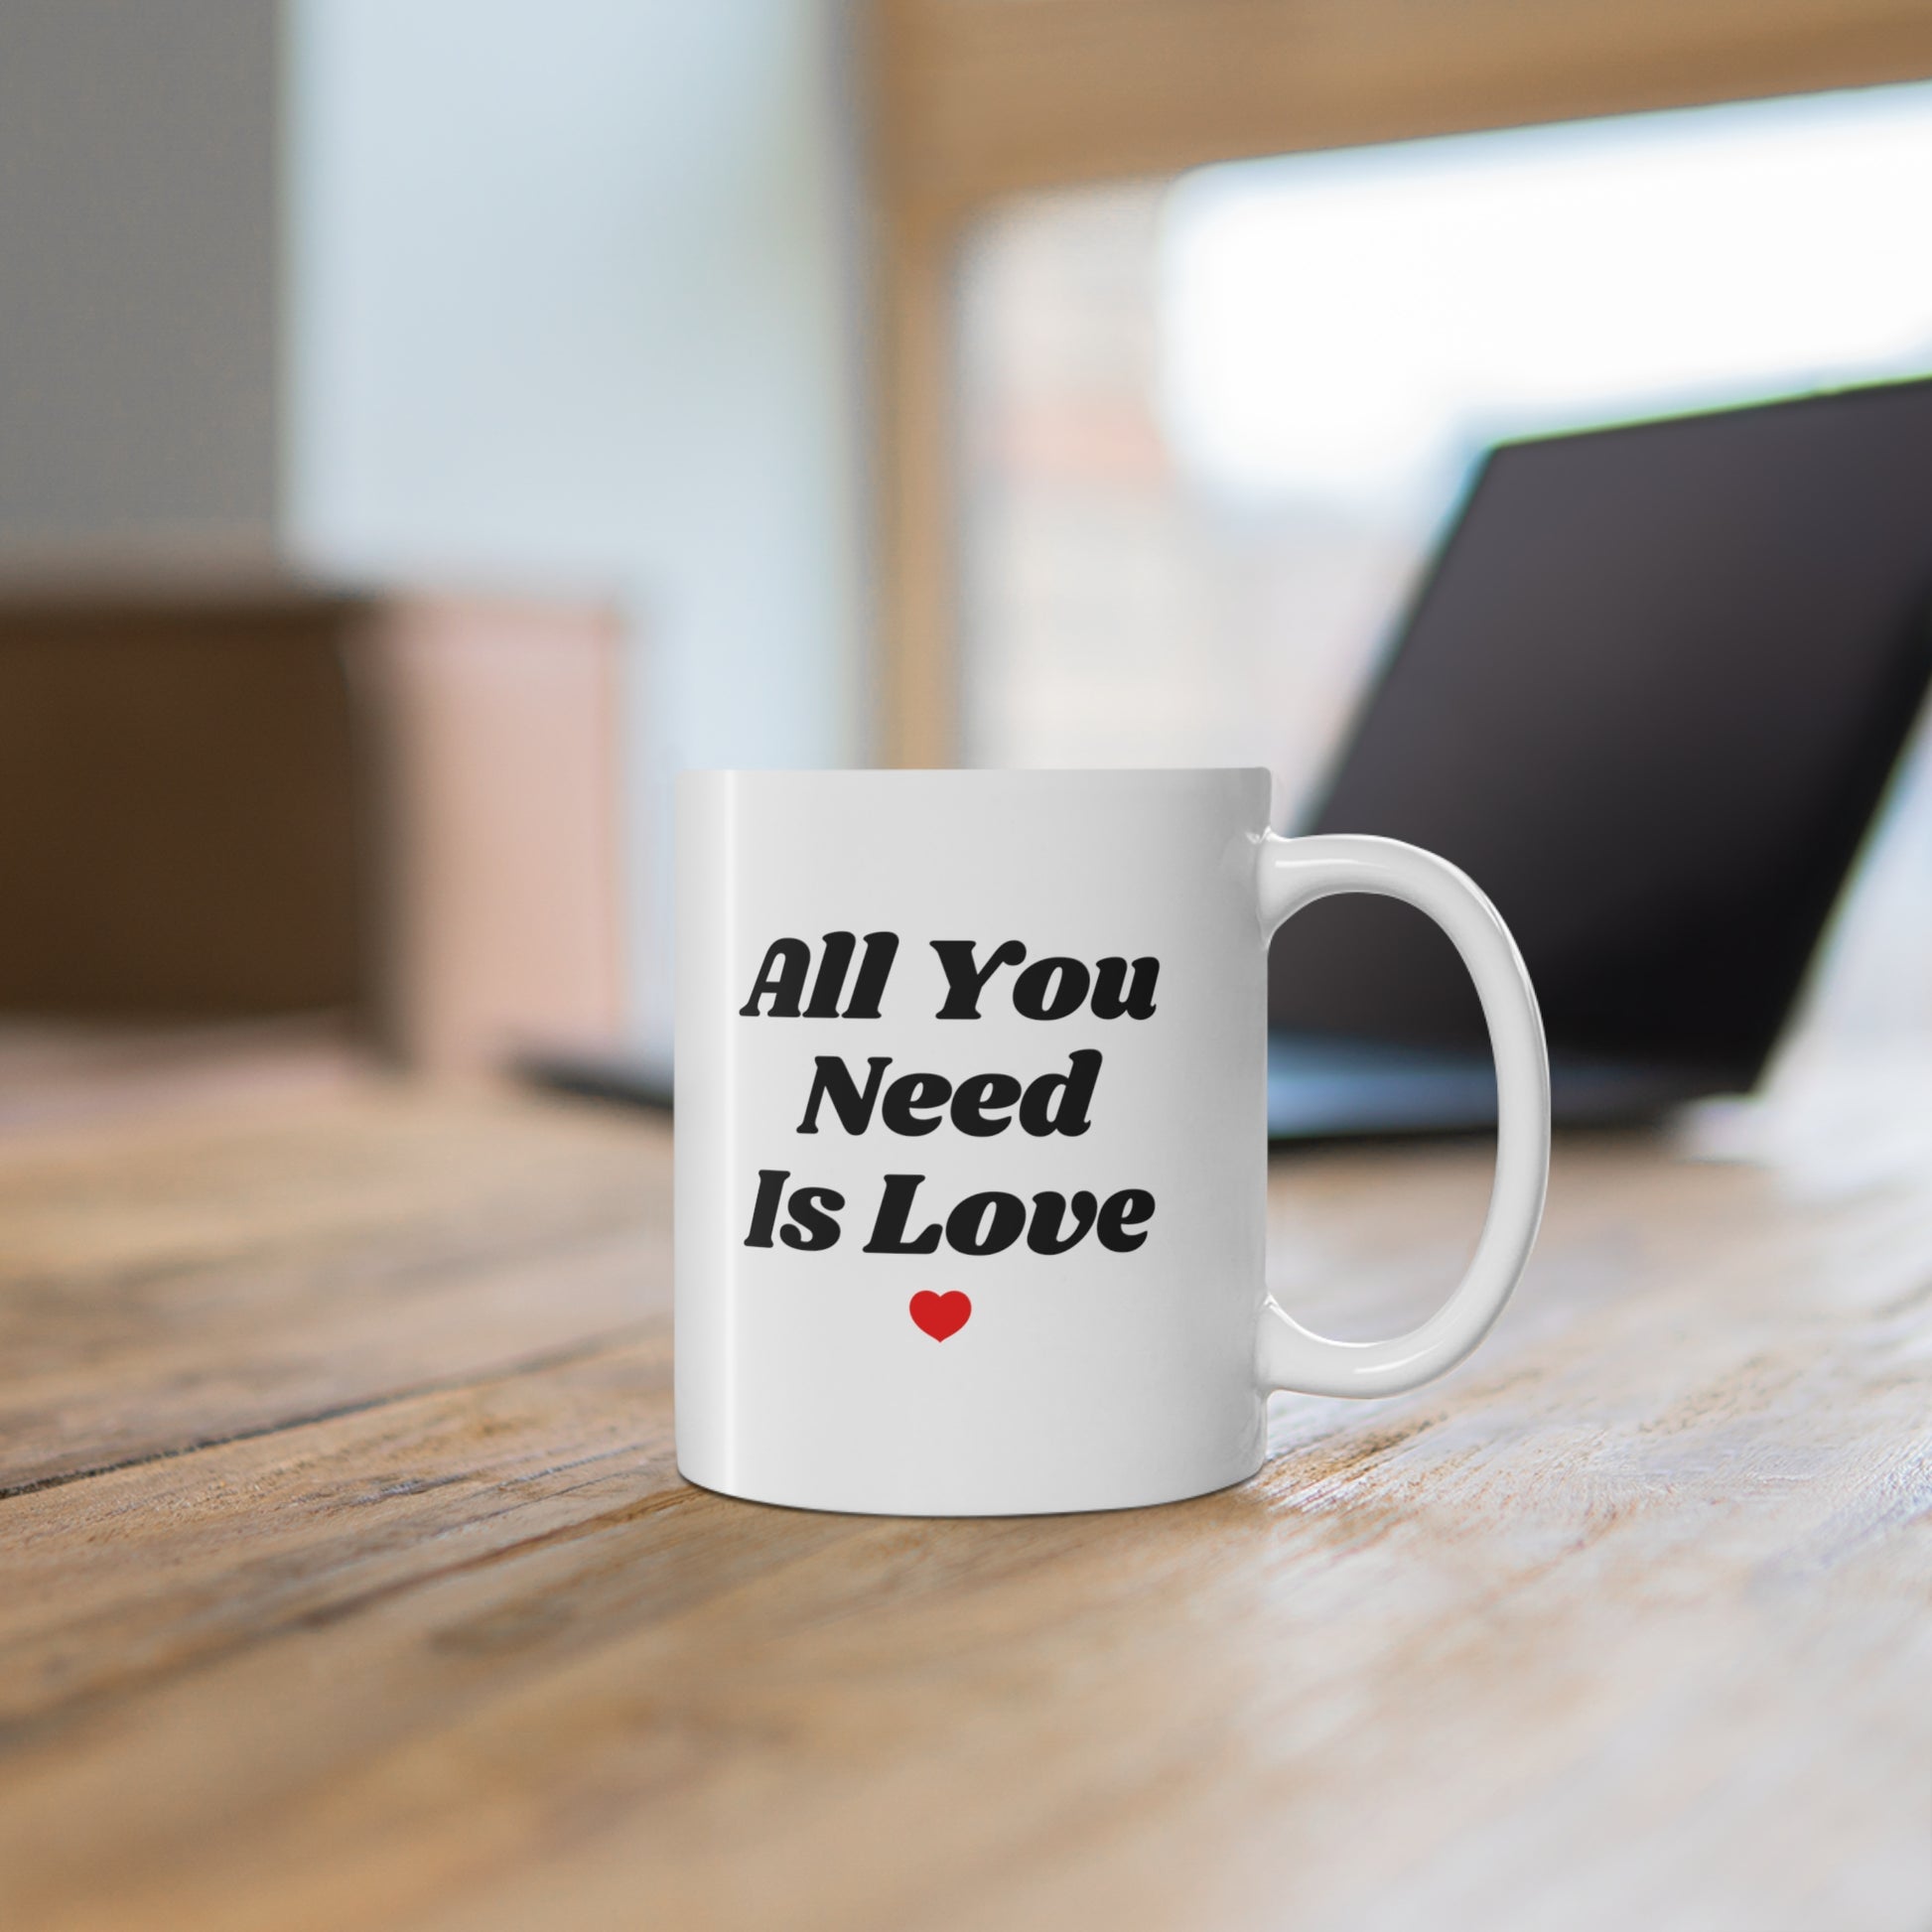 11oz ceramic mug with quote All You Need Is Love 